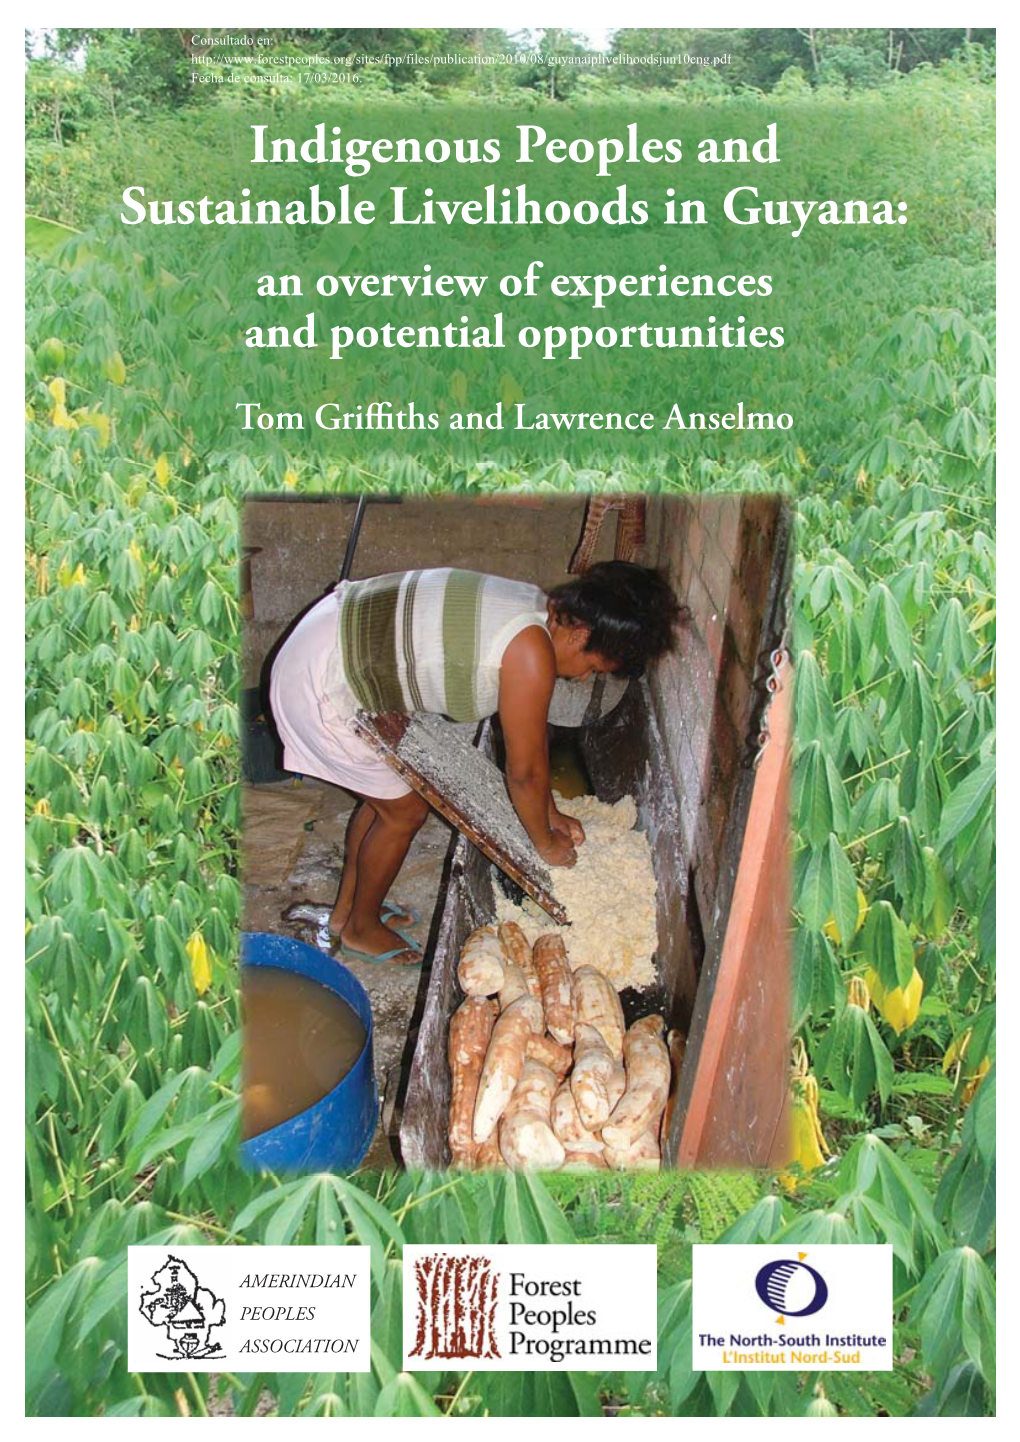 Indigenous Peoples and Sustainable Livelihoods in Guyana: an Overview of Experiences and Potential Opportunities